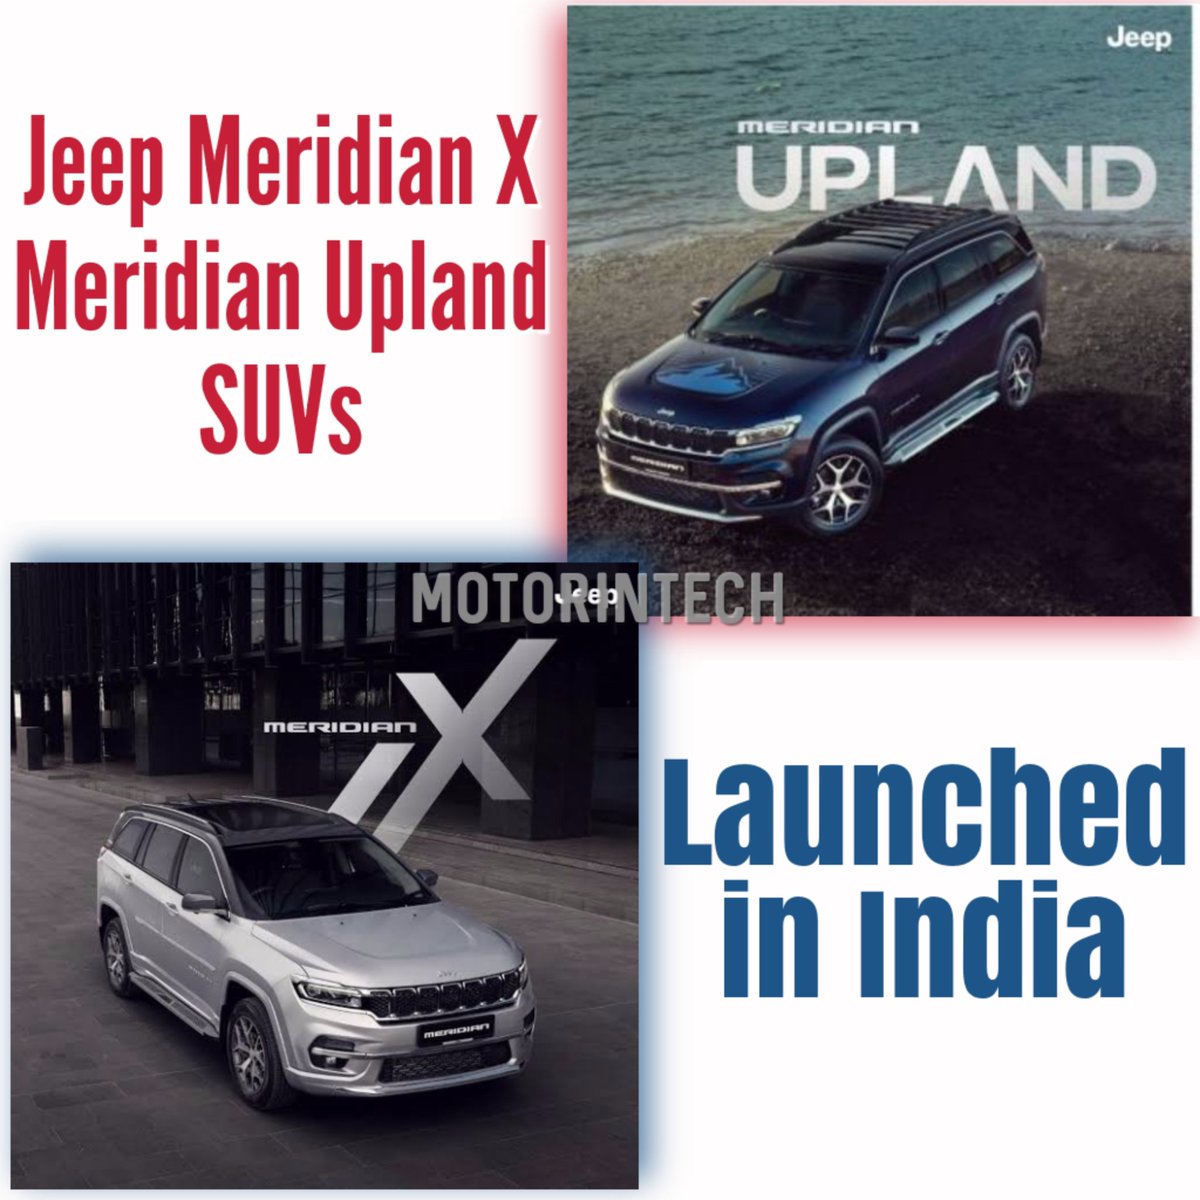 Jeep India launched the all new Jeep Meridian X and Jeep Meridian Upland in India. The price starts at Rs 33.41 lakh and go up to Rs 38.47 lakh (ex-showroom).

#jeepindia #jeepmeridian #jeepupland #jeepmeridianx #jeep #jeepwrangler #jeeplife #automobile #autoindia #indiancars